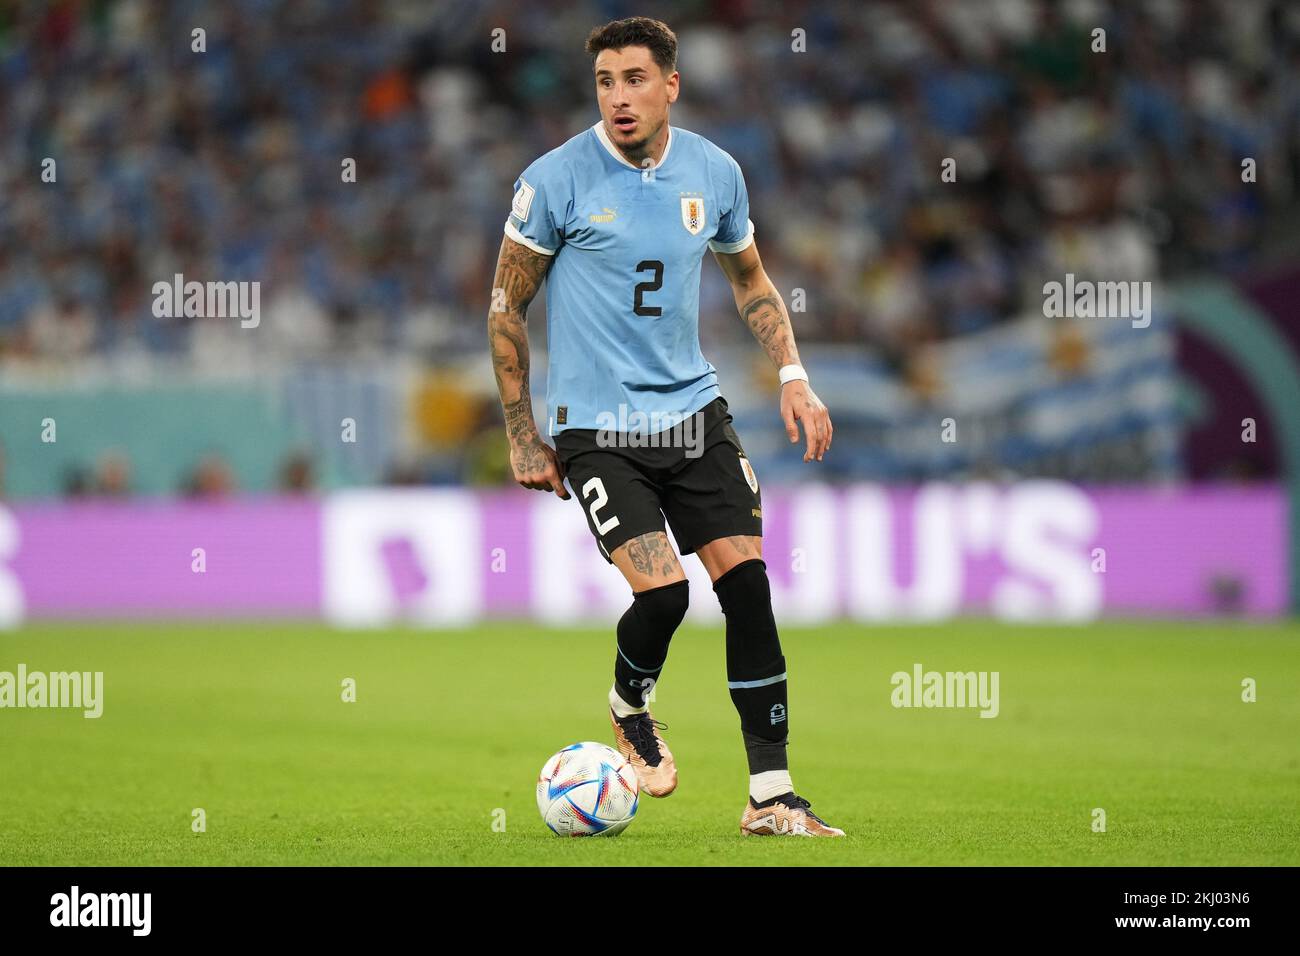 Jose Maria Gimenez of Uruguay during the Qatar 2022 World Cup match, group H, date 1, between Uruguay and Korea Republic played at Education City Stadium on Nov 24, 2022 in Rayan, Qatar. (Photo by Bagu Blanco / PRESSINPHOTO/Sipa USA) Stock Photo